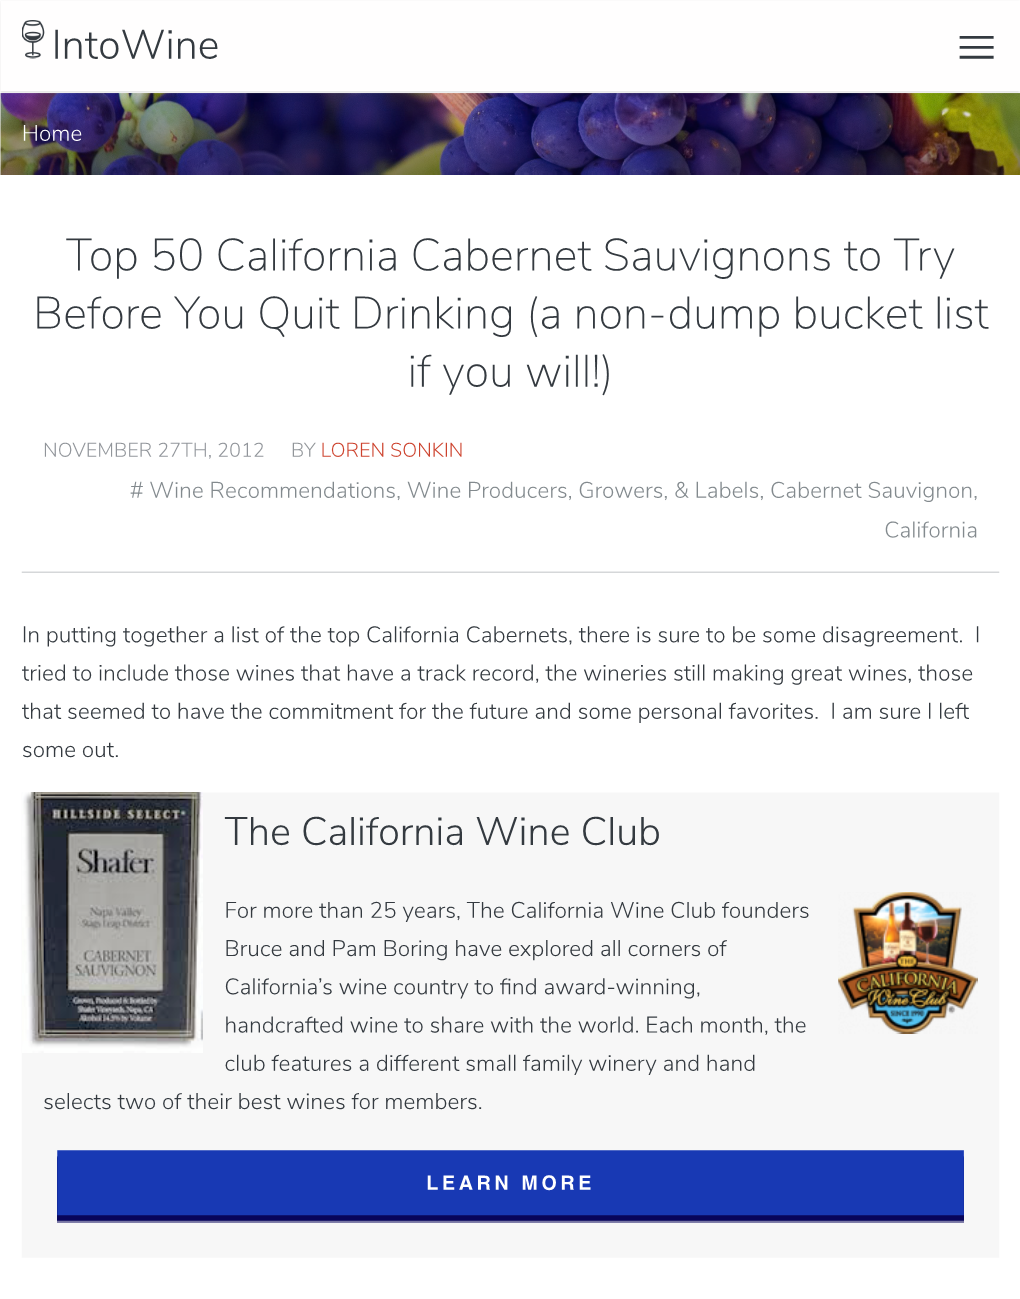 Top 50 California Cabernet Sauvignons to Try Before You Quit Drinking (A Non-Dump Bucket List If You Will!)